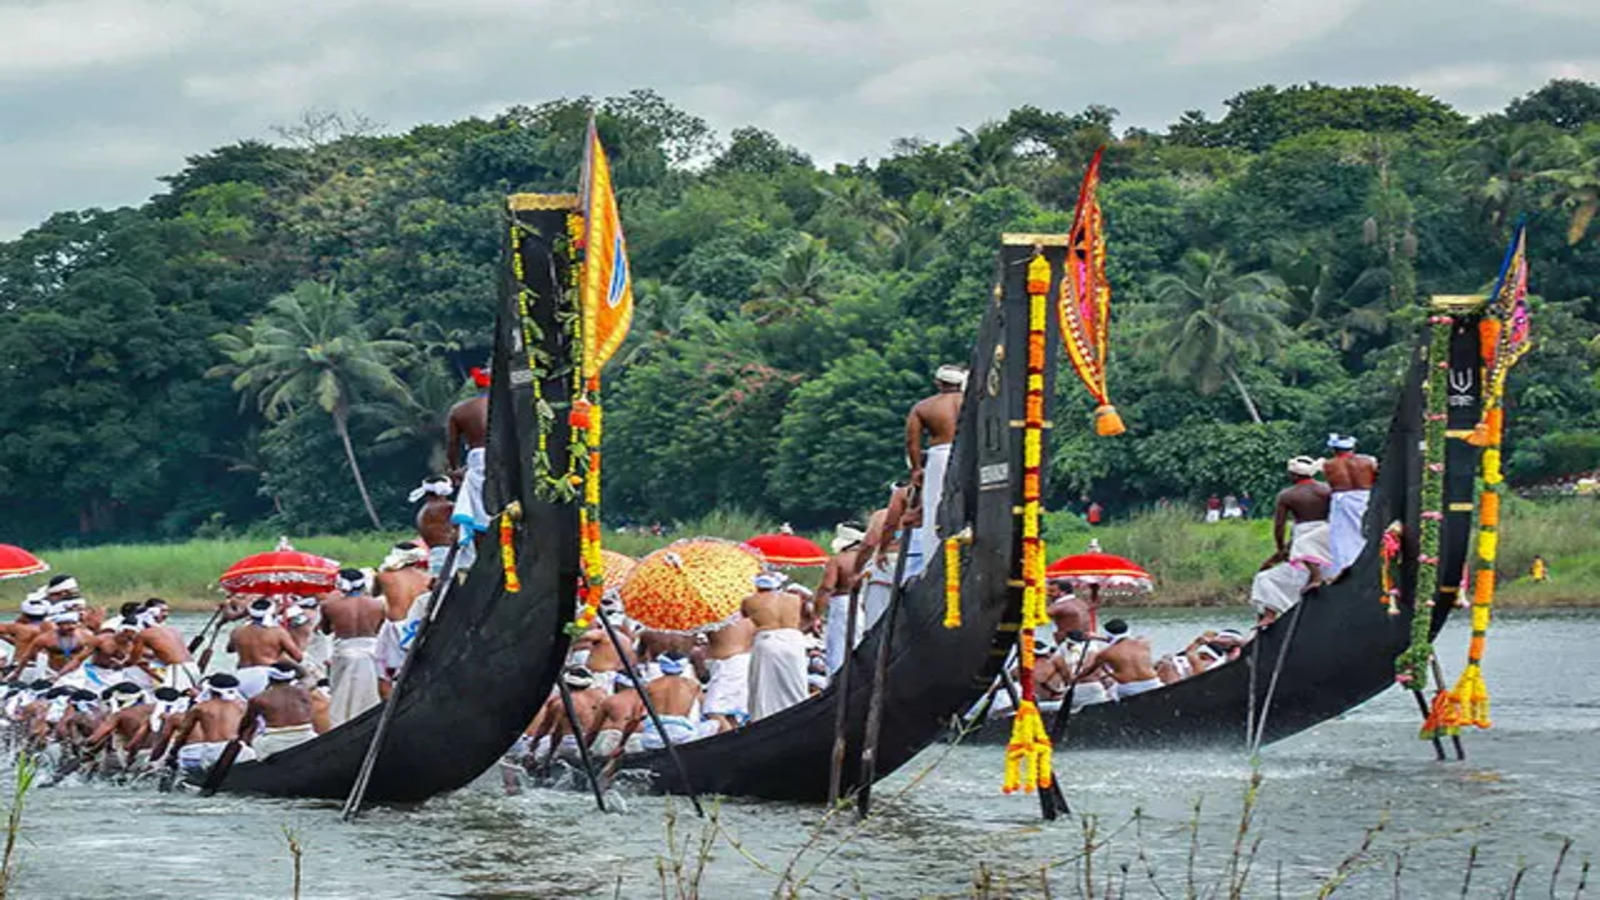 Watch: Vallam Kali, Kerala's Traditional Boat Race Held Symbolically With Just Three Snake Boats Due To The Covid 19 Situation In The State Economic Times Video